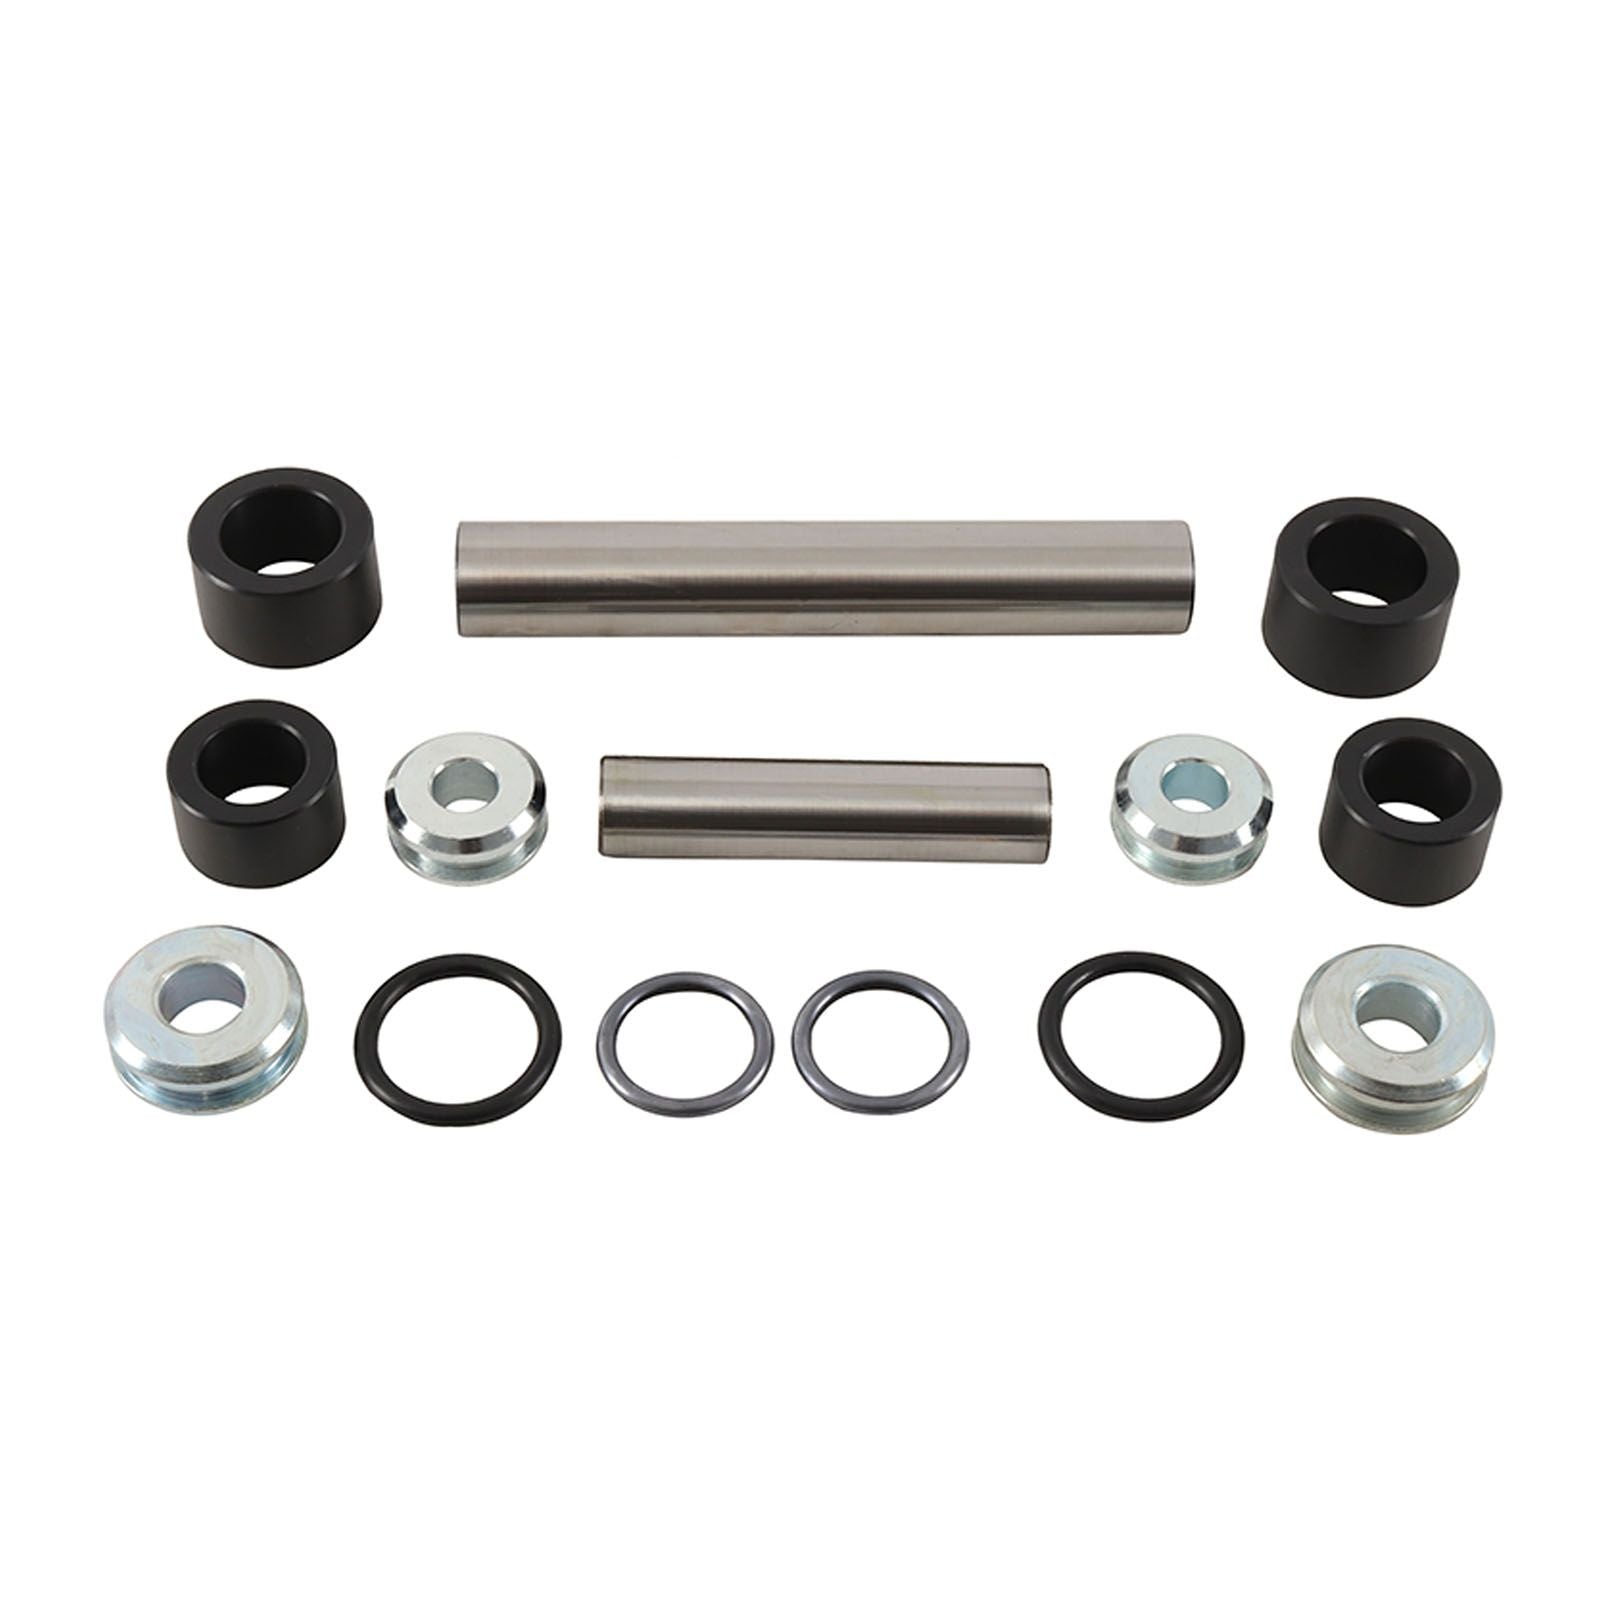 New ALL BALLS Racing Independent Suspension Knuckle Only Kit - Rear #AB501216